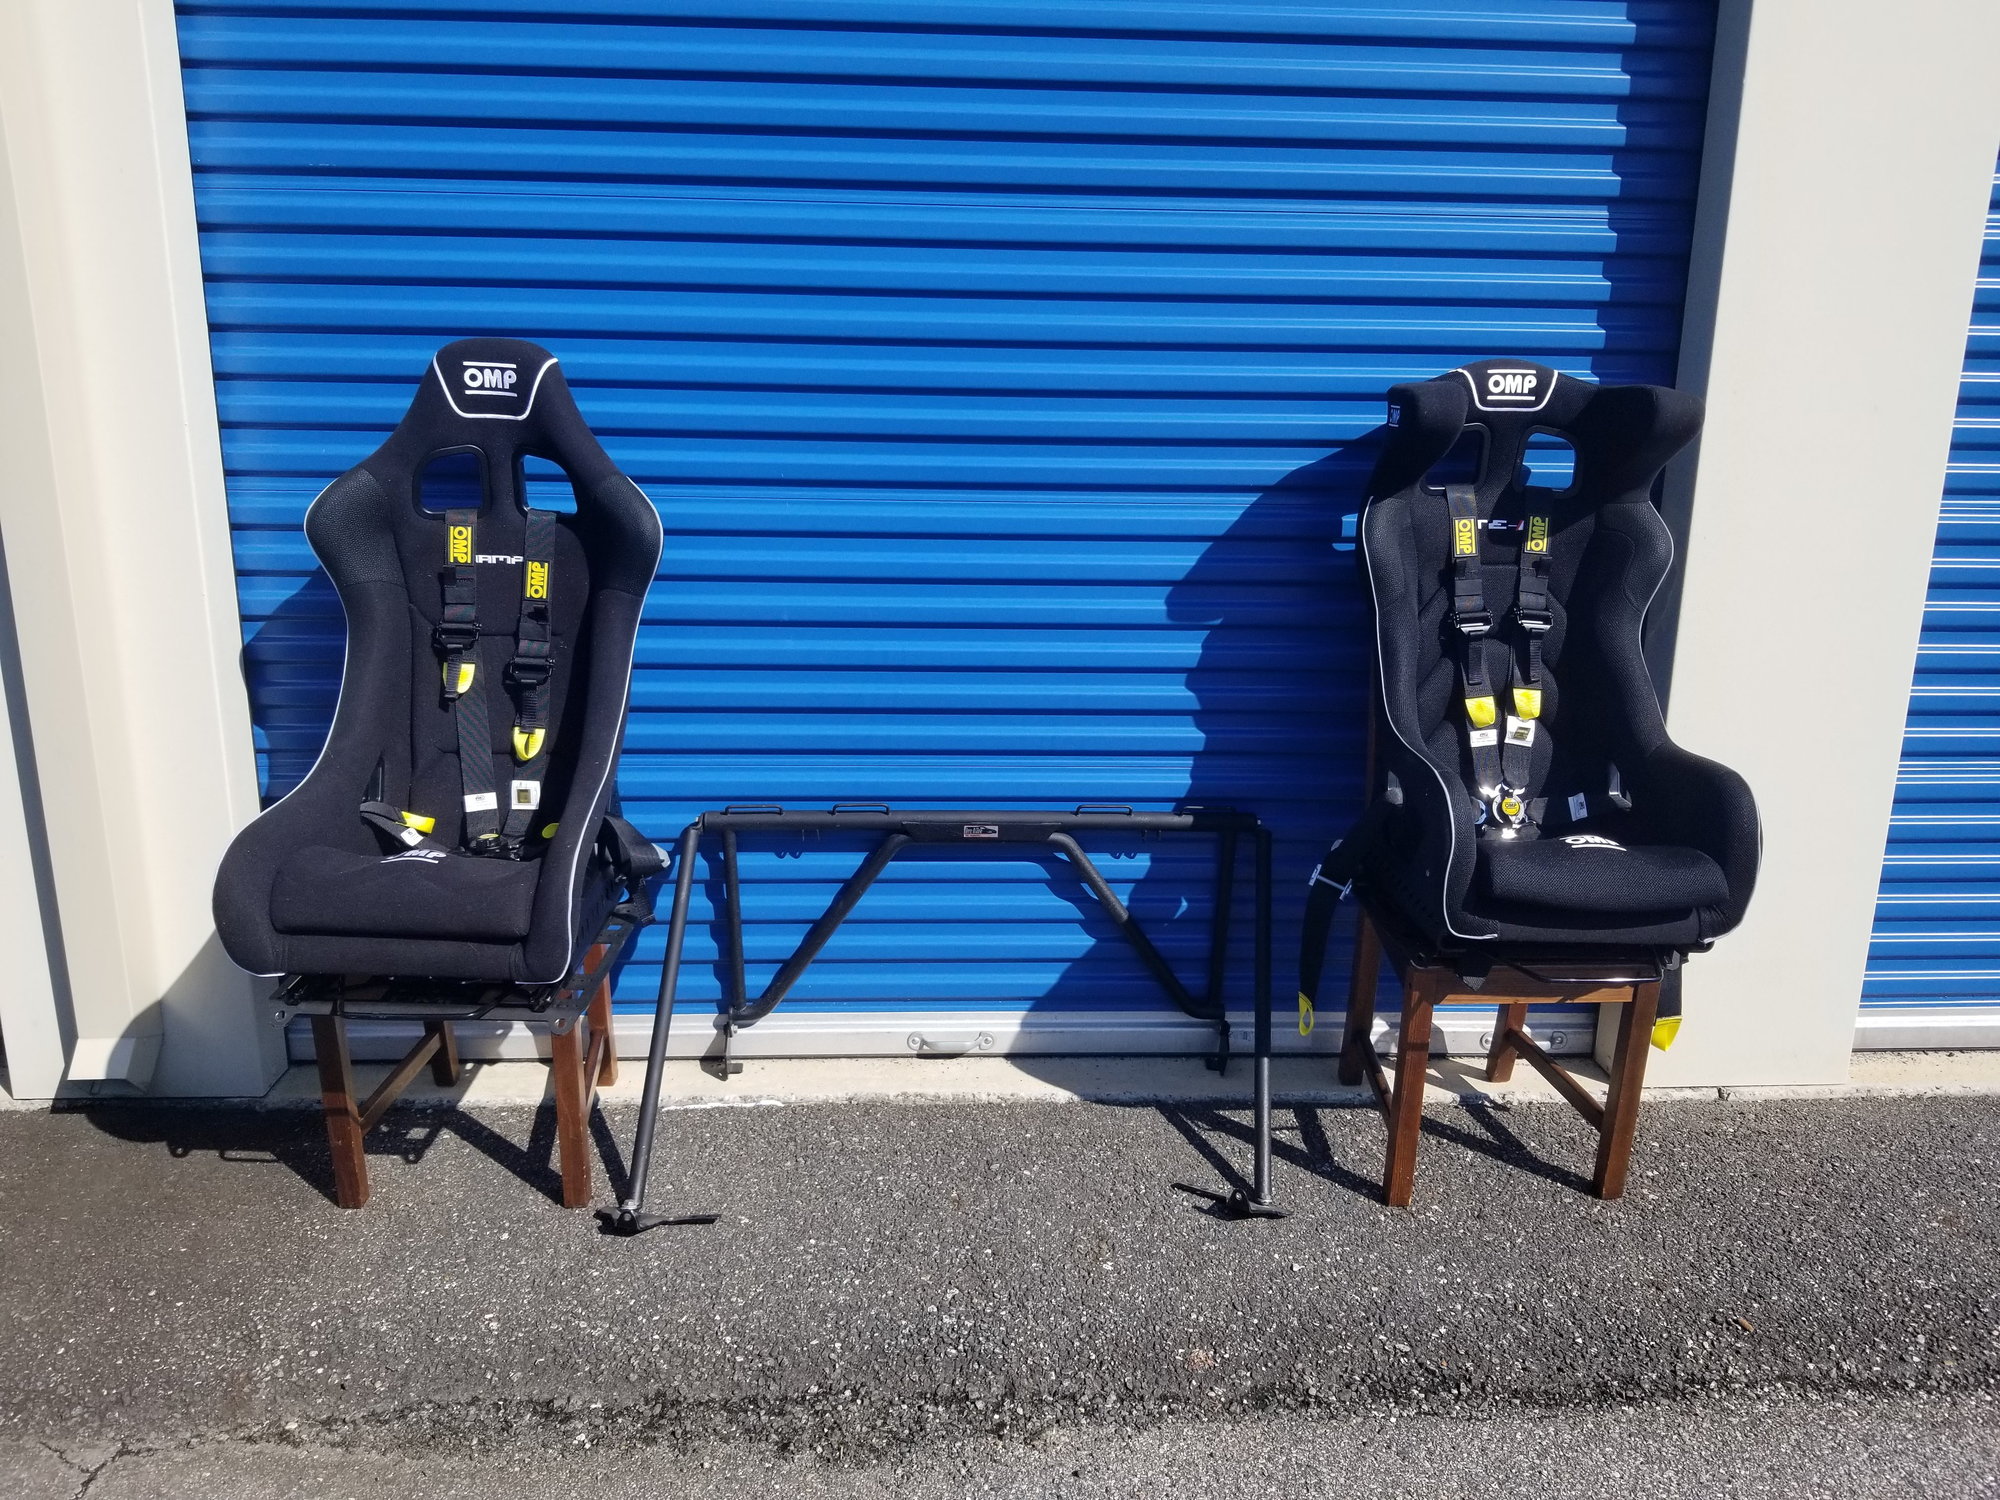 Interior/Upholstery - Brand New OMP HTE-R containment racing seat + OMP CHAMP-R - New - 1999 to 2020 Porsche 911 - 2006 to 2016 Porsche Cayman - Chesapeake, VA 23321, United States